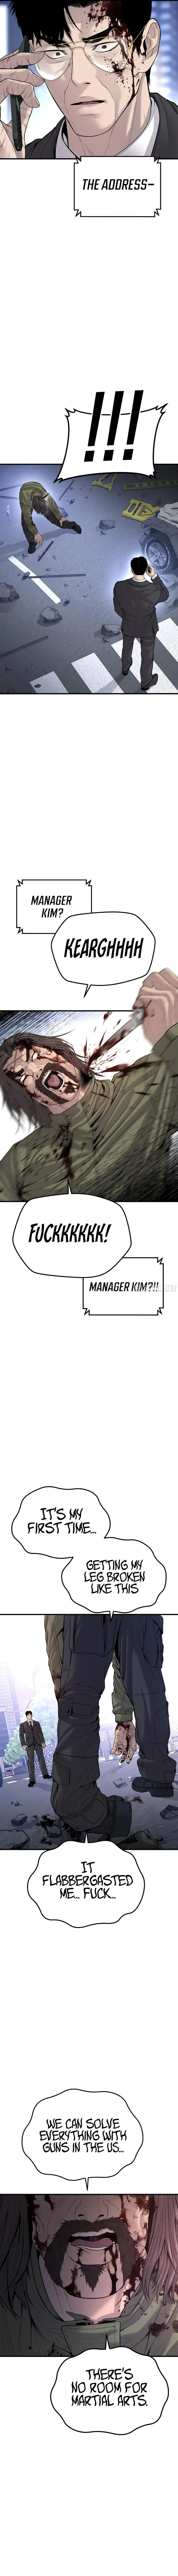 manager-kim-chap-100-3